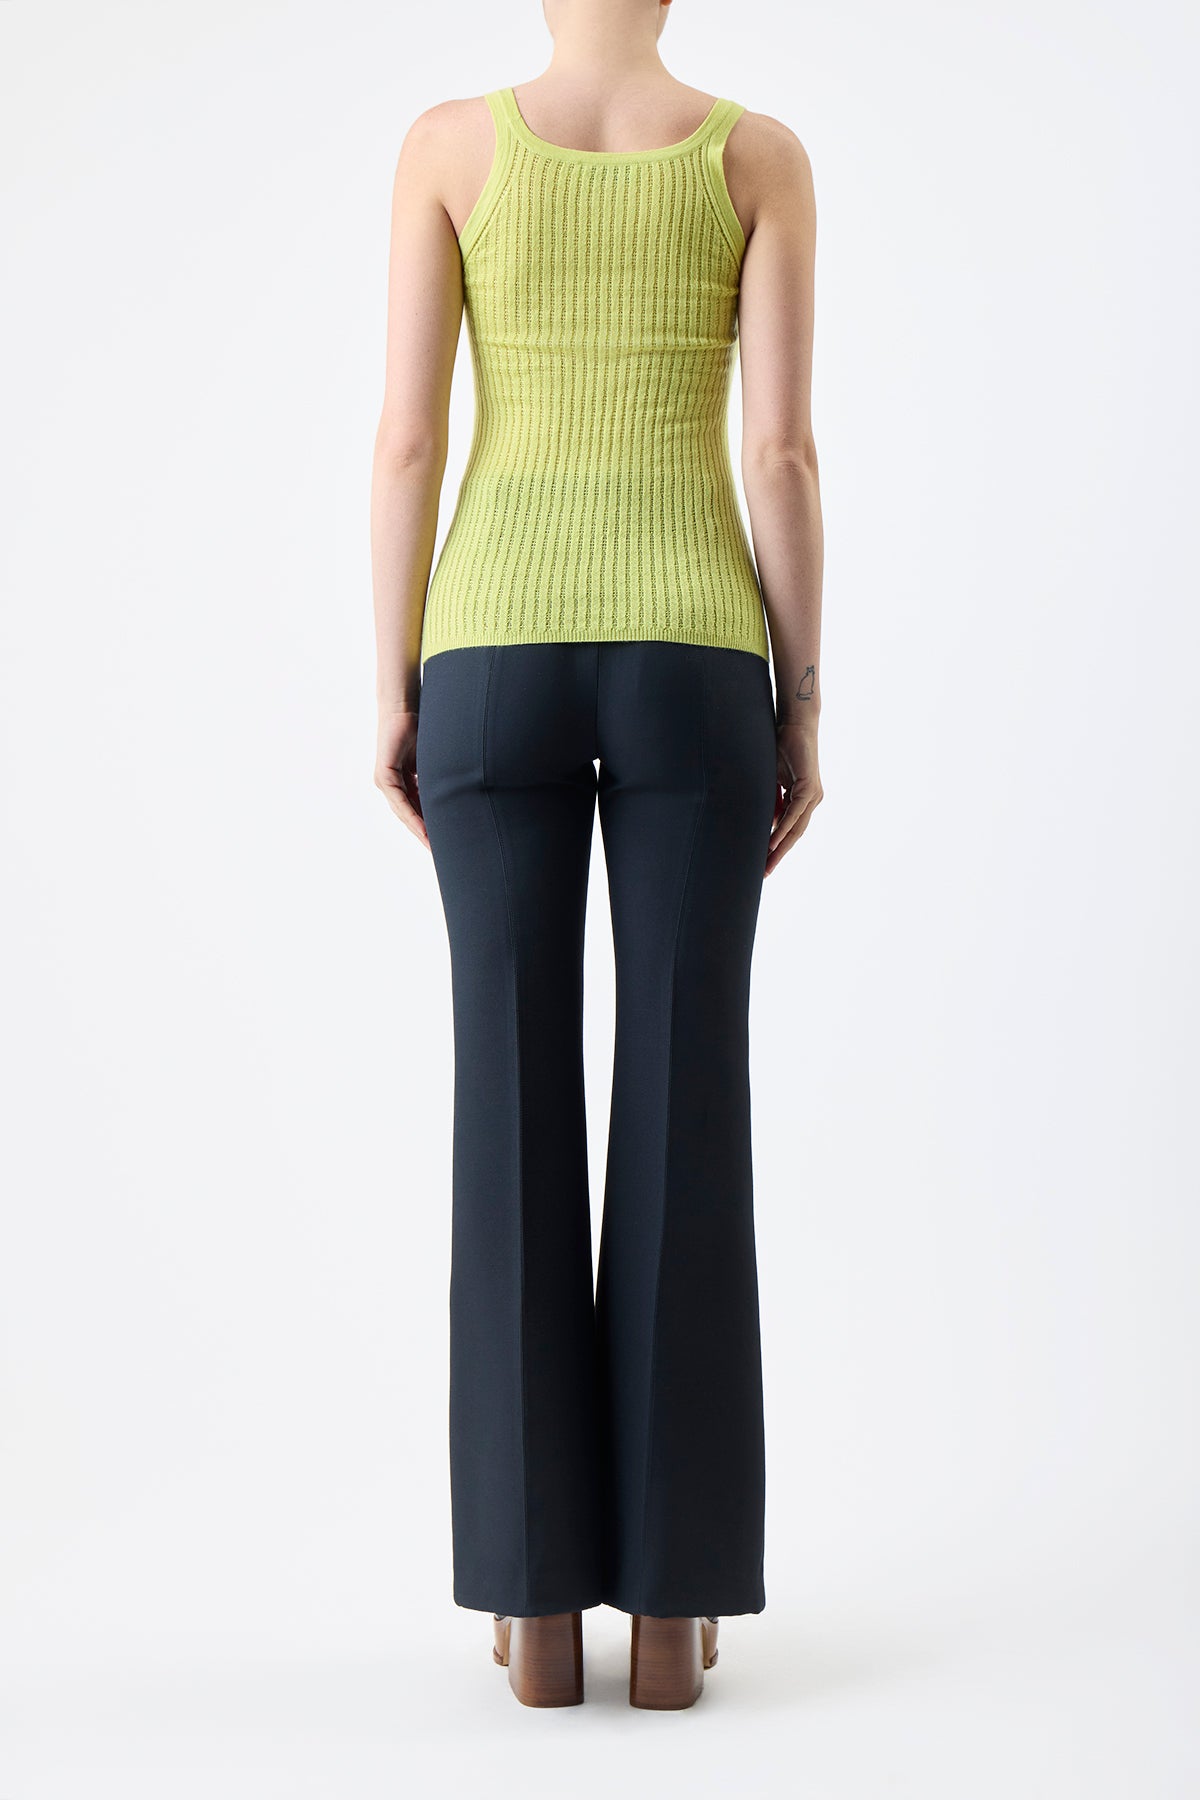 Nevin Pointelle Knit Tank Top in Lime Adamite Cashmere Silk